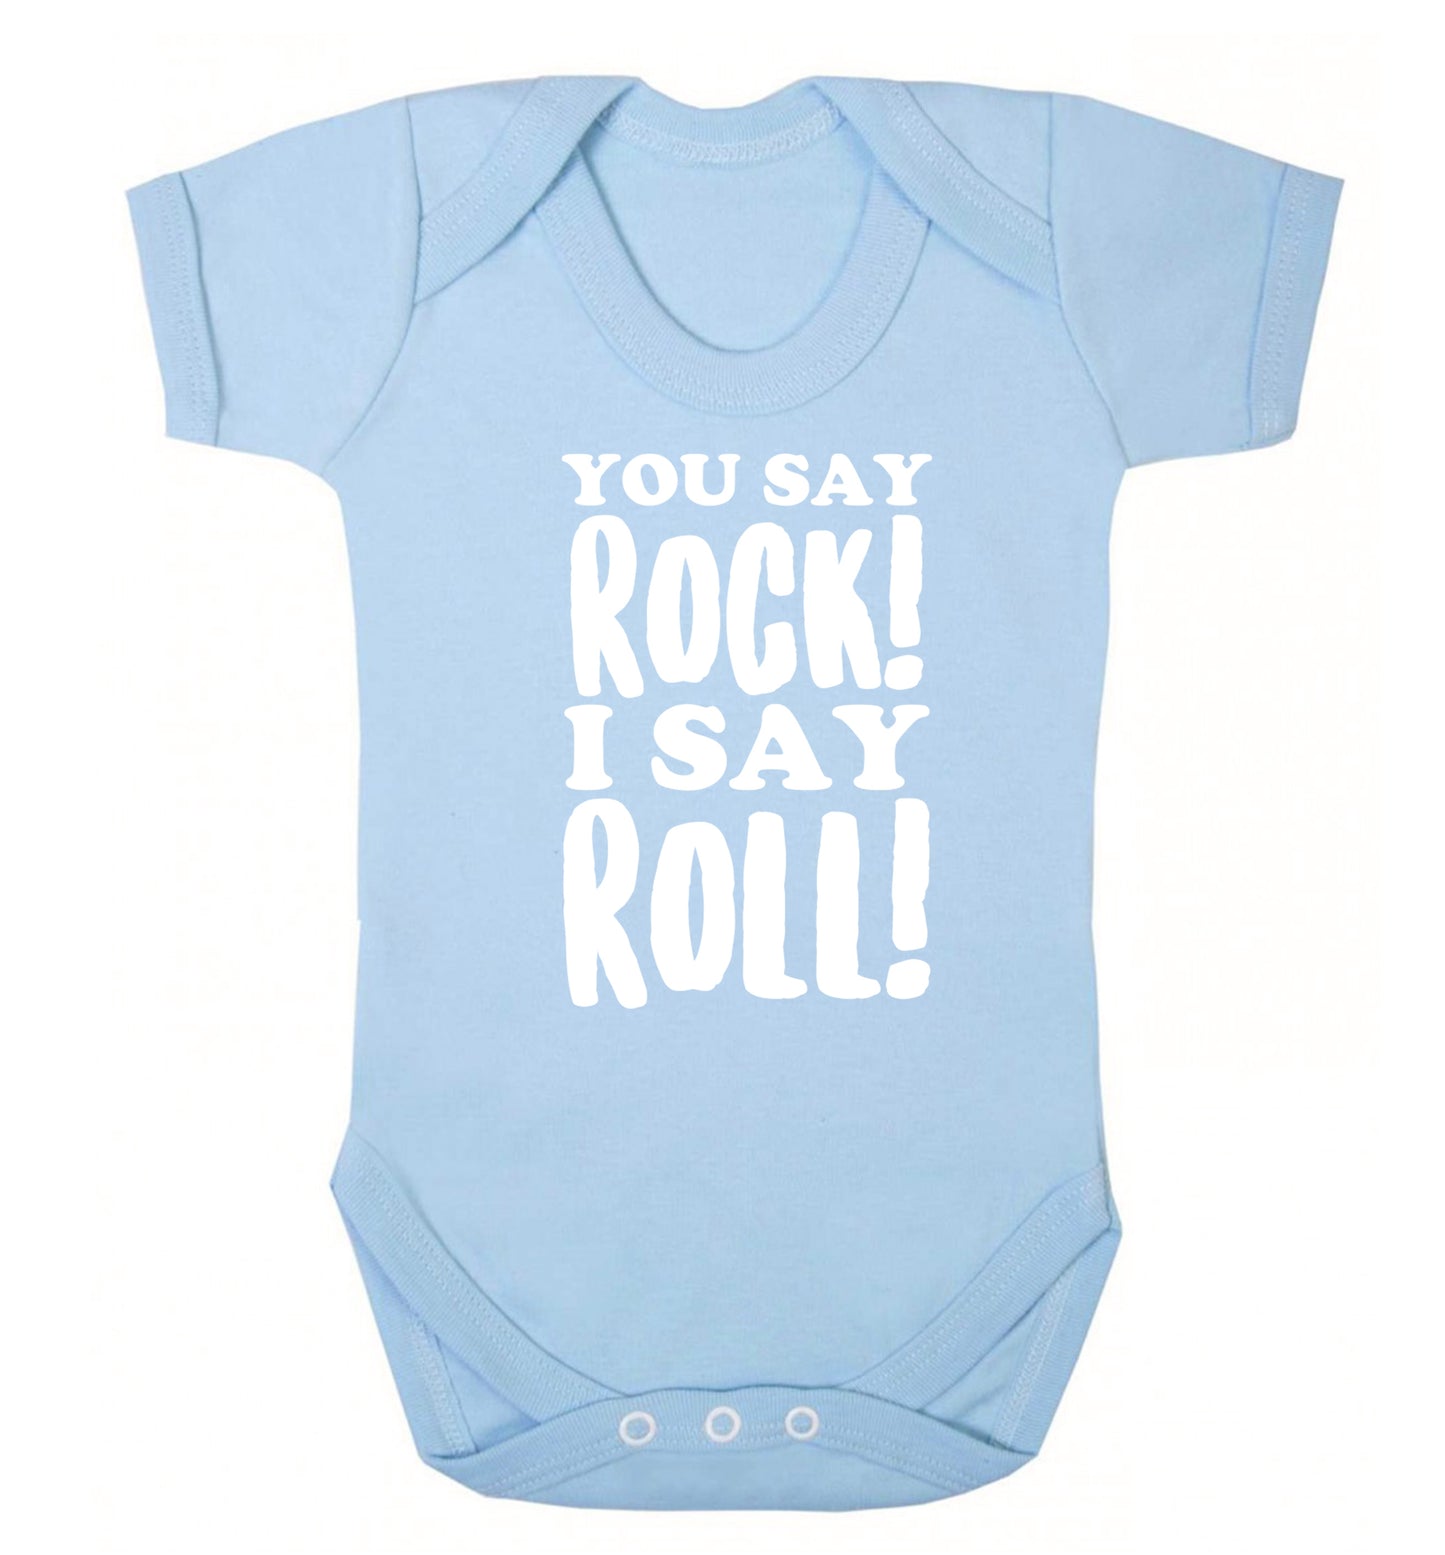 You say rock I say roll! Baby Vest pale blue 18-24 months